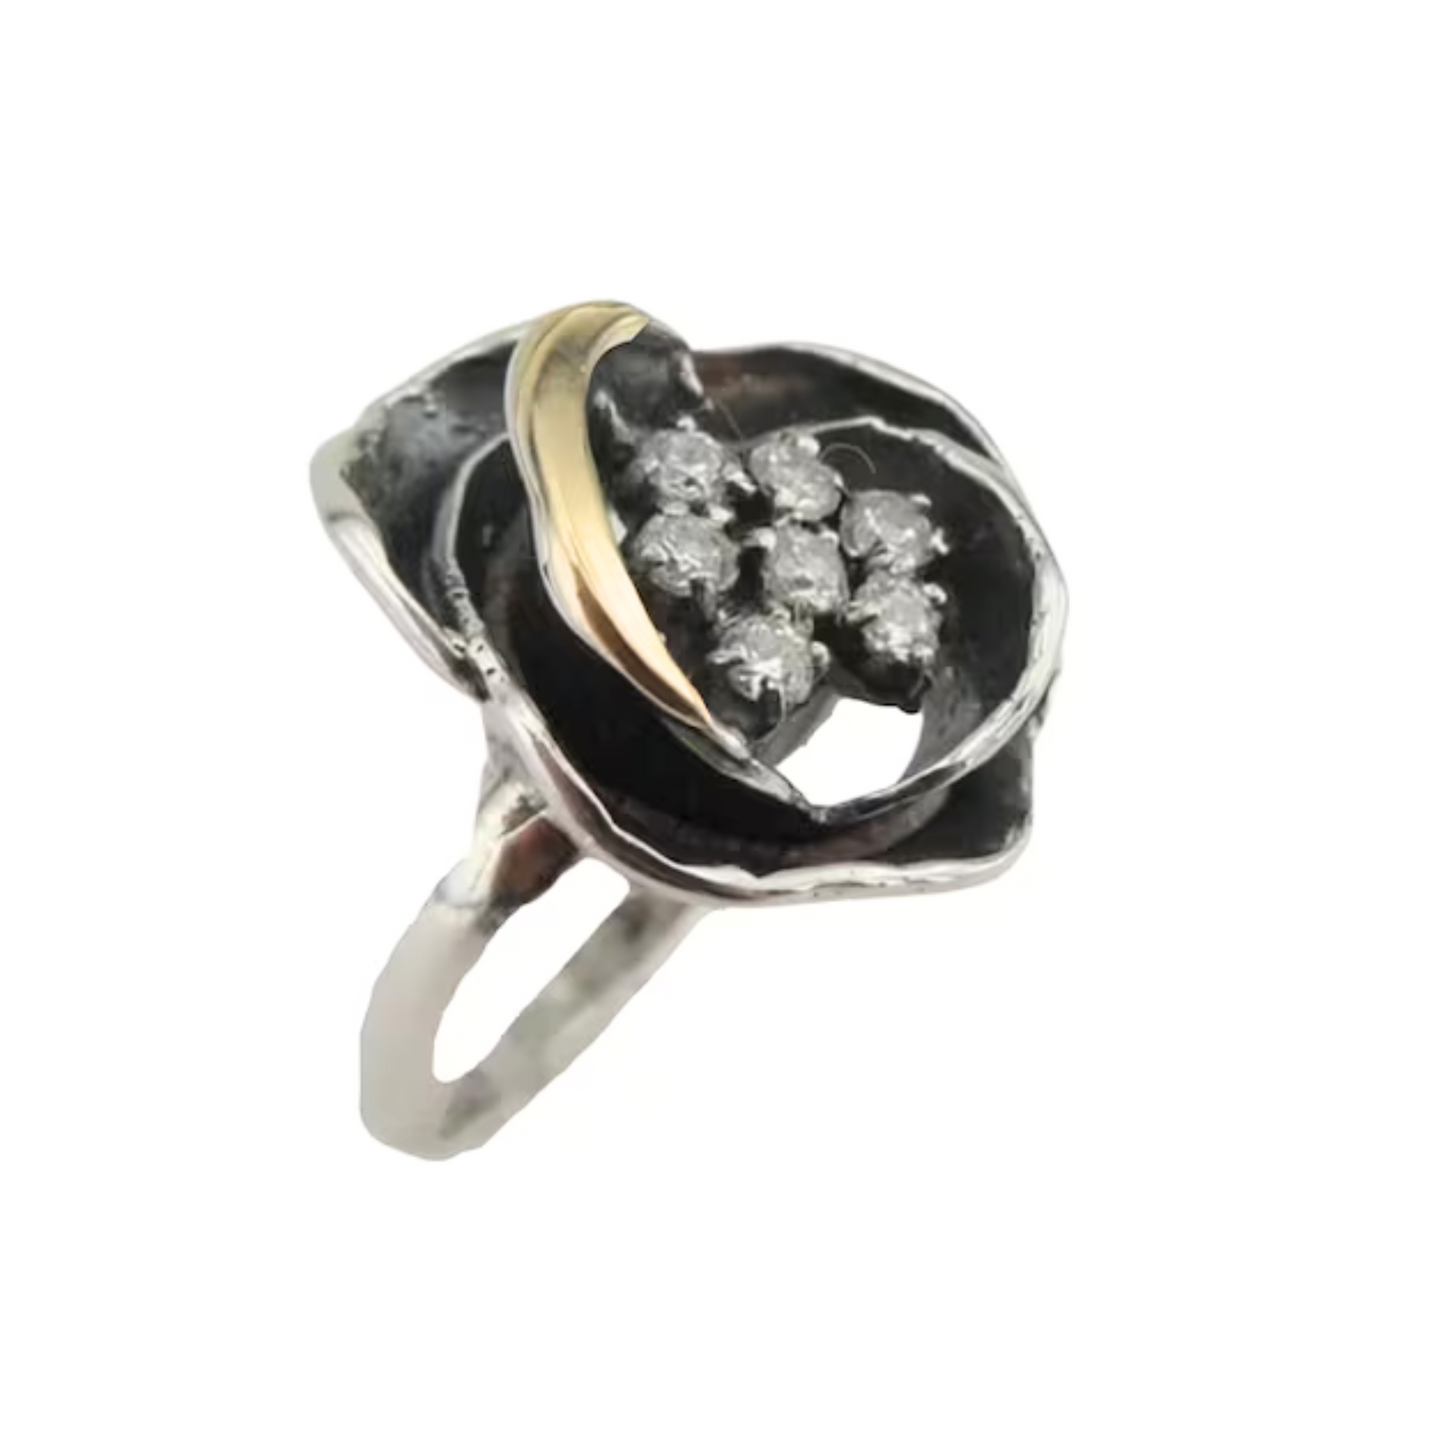 Rose-shaped Ring, Sterling Silver, Gold, and Zircon gemstones.